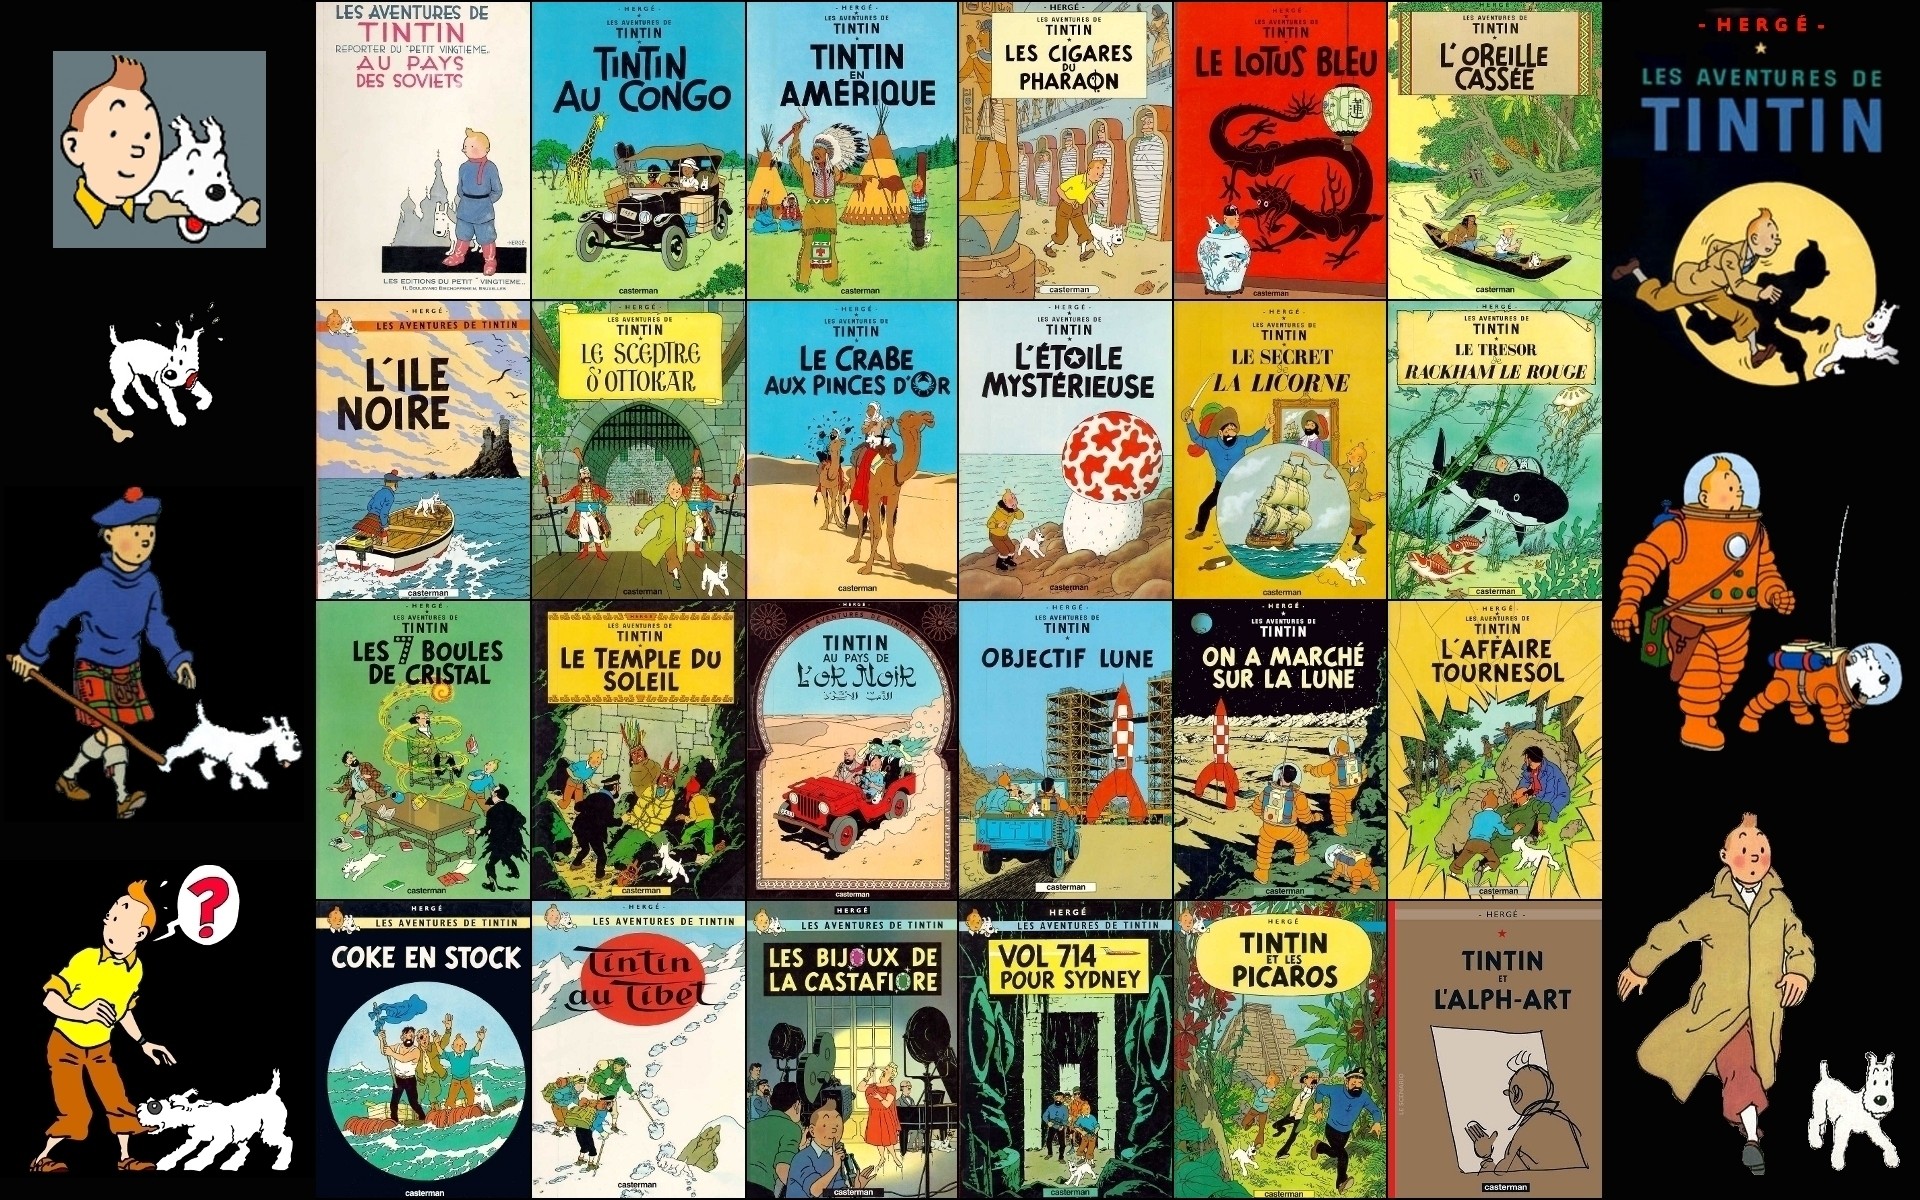 1920x1200 Tintin images The adventures of Tintin HD wallpaper and background photos